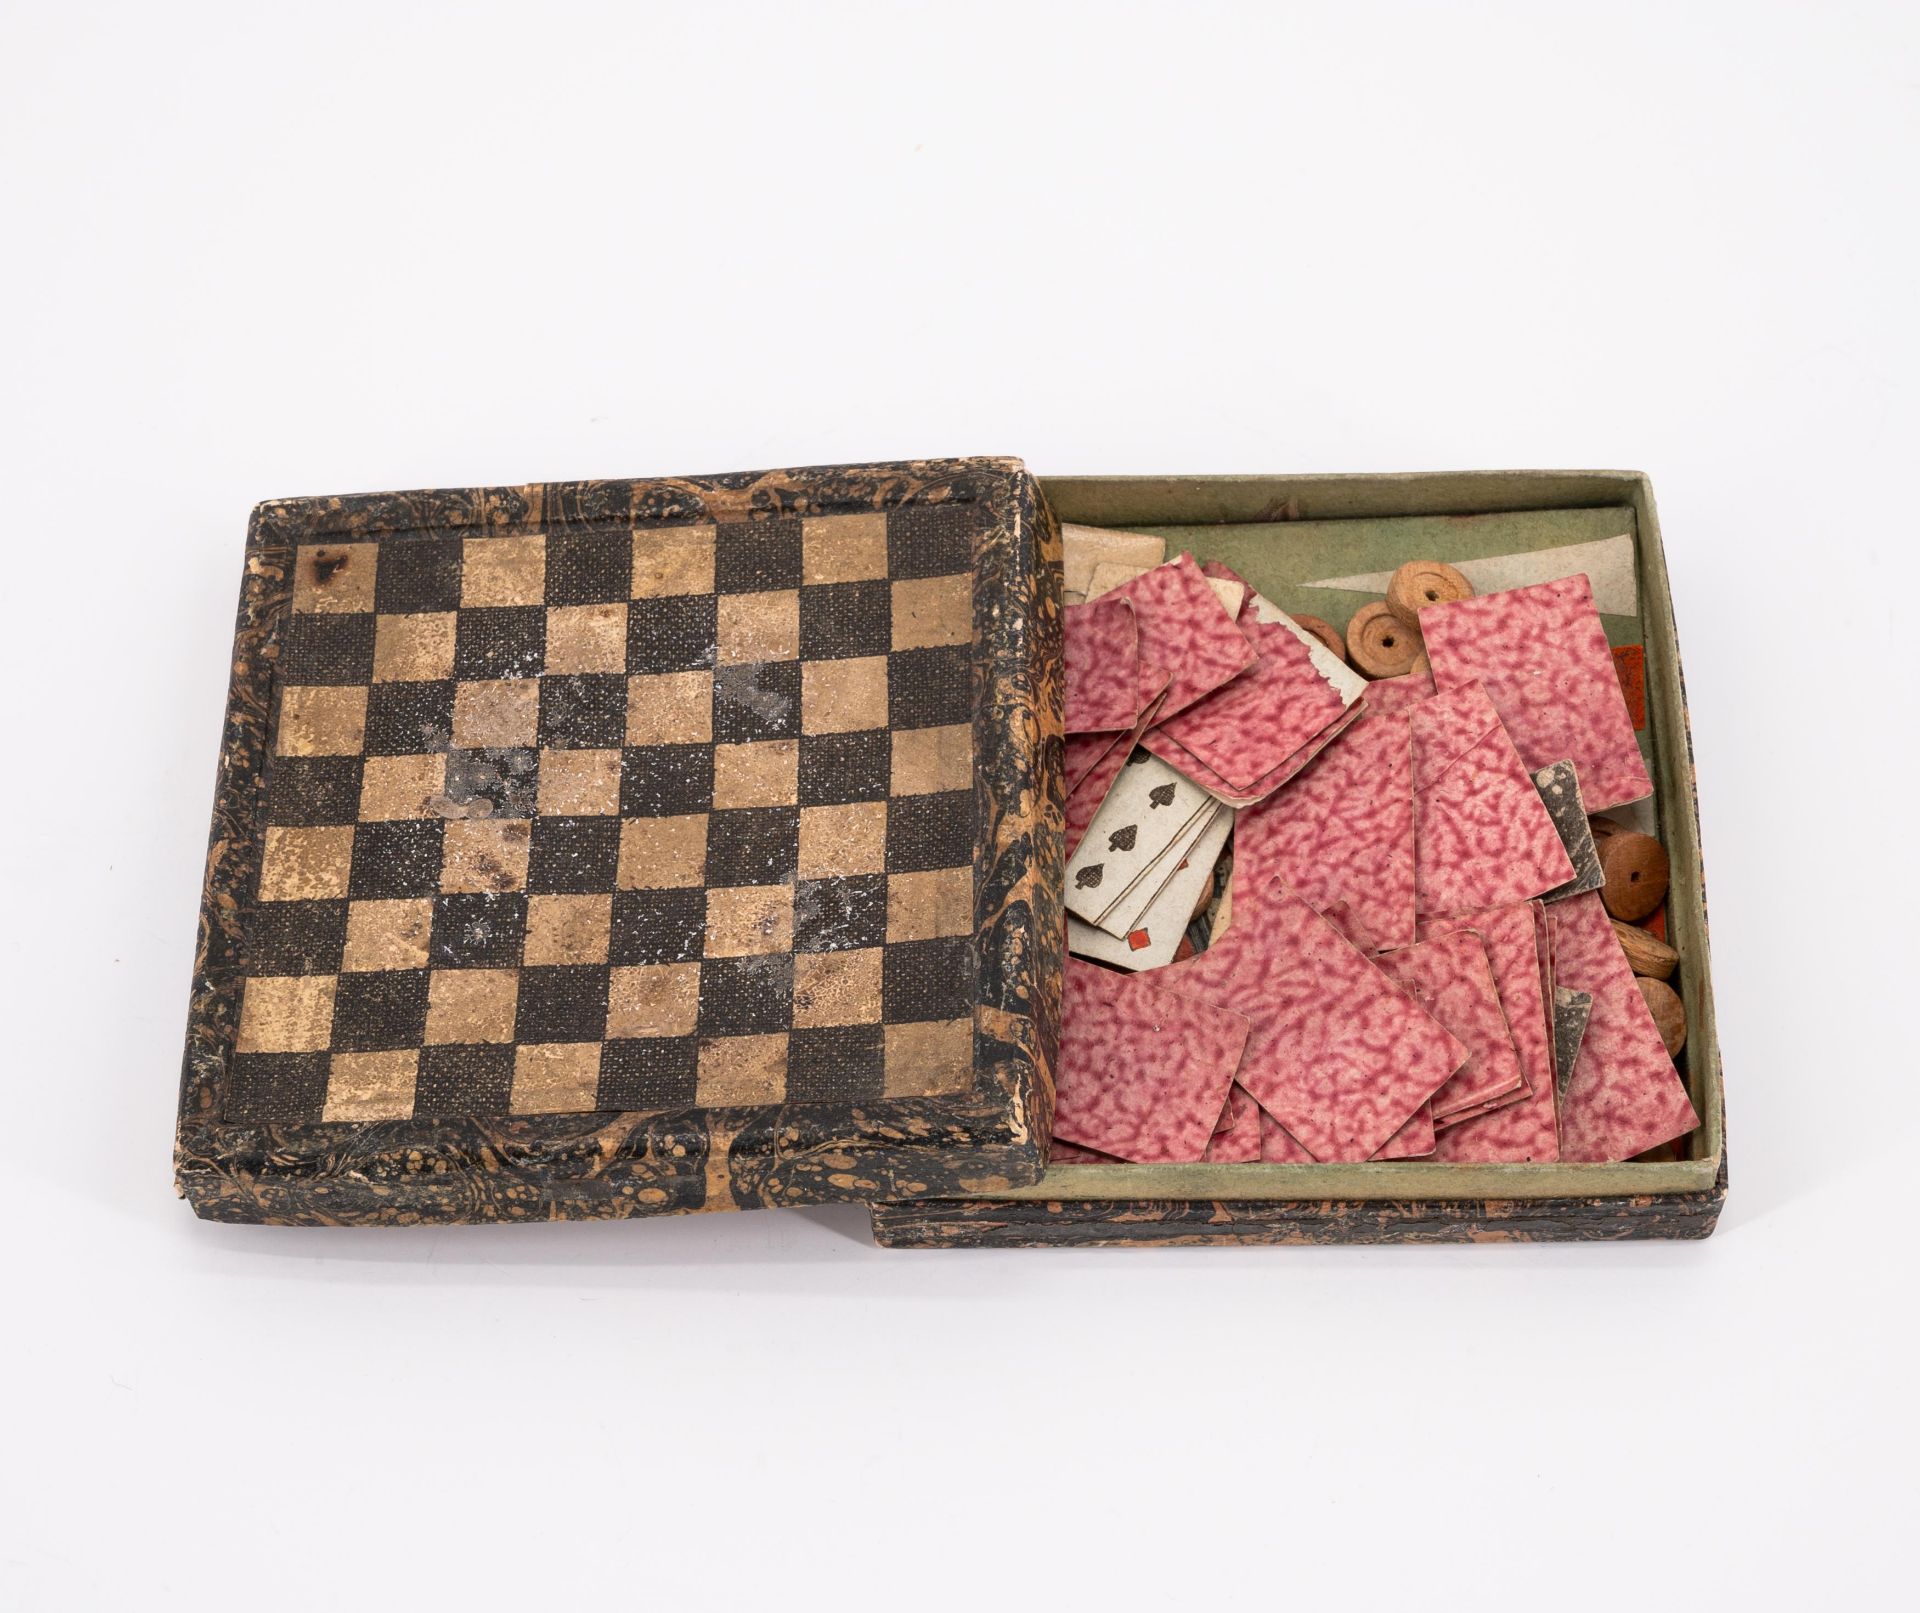 Germany: MINIATURE WOODEN GAME BOX, SET OF GLASS MARBLES AND PLAYING CARD BOX - Image 5 of 5